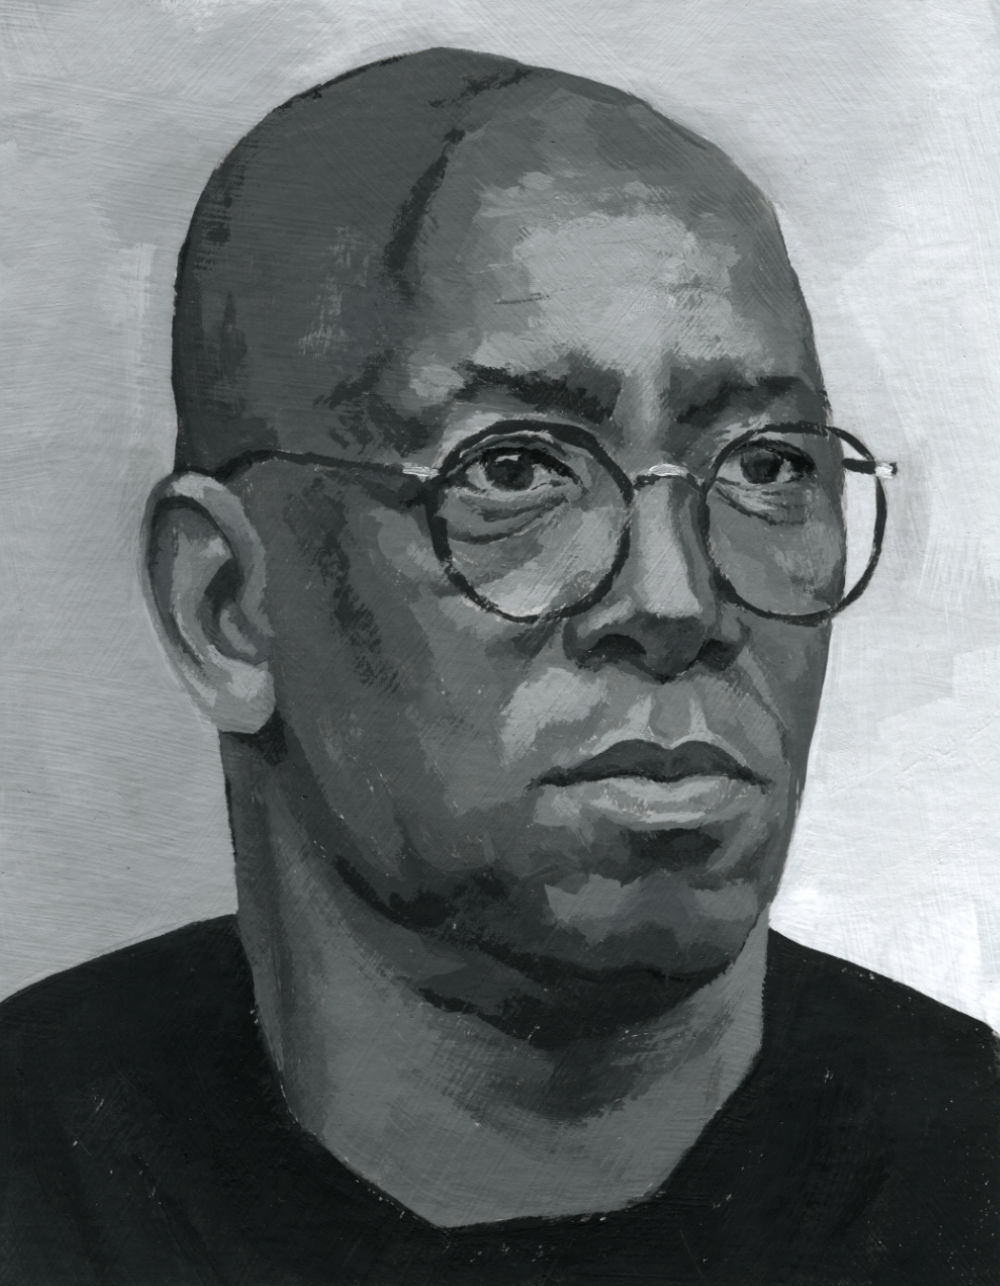 Ian Wright painting in Gouache on Board, by Artist & Illustrator James Martin